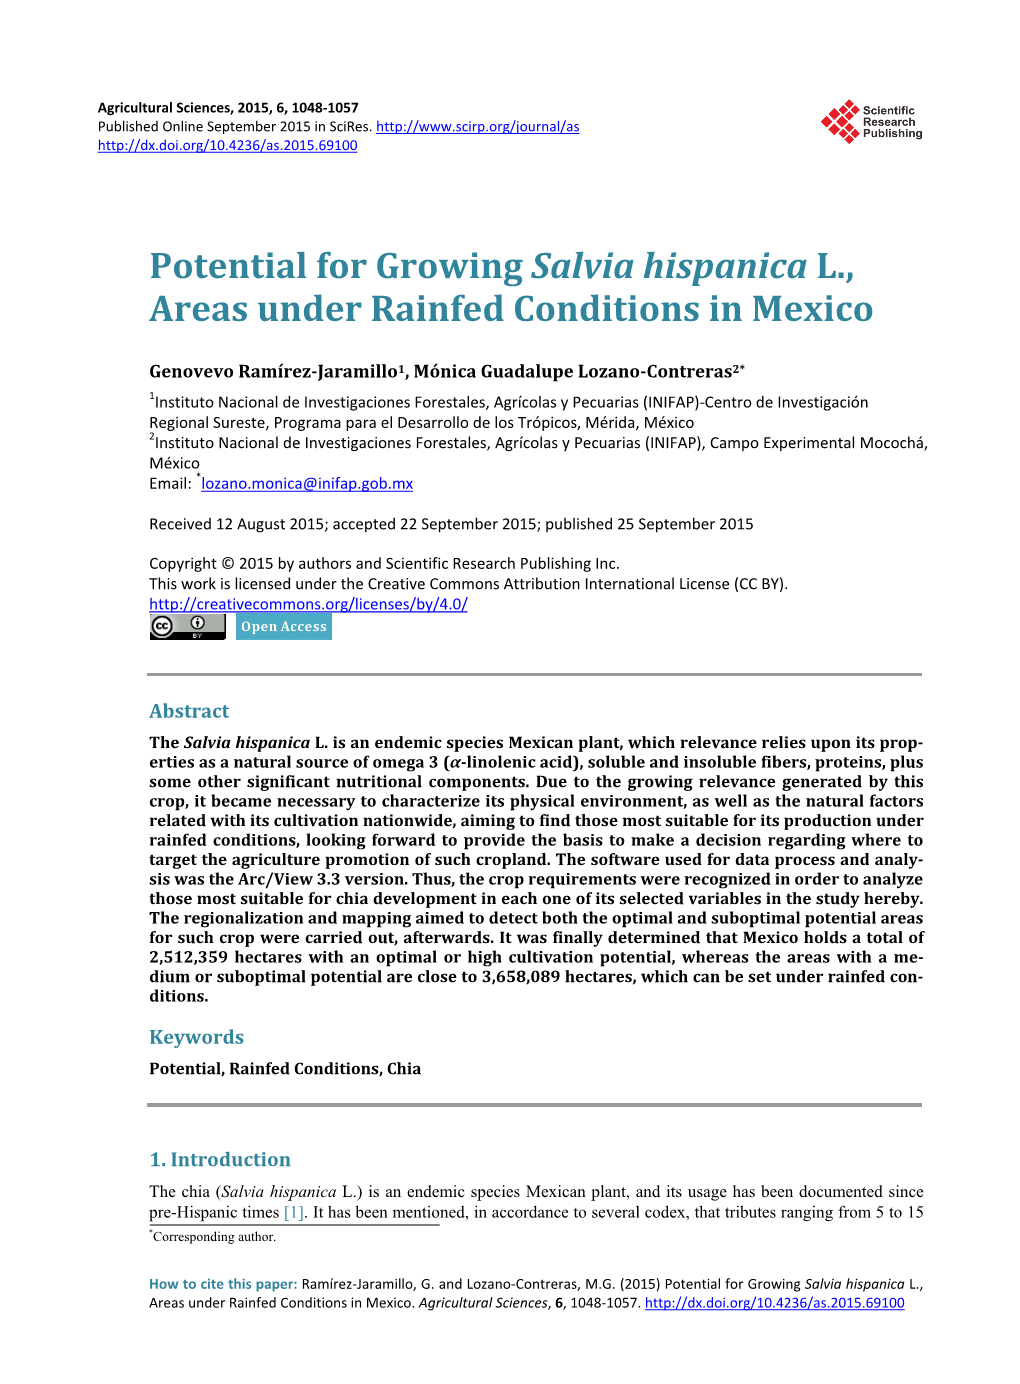 Potential for Growing Salvia Hispanica L., Areas Under Rainfed Conditions in Mexico